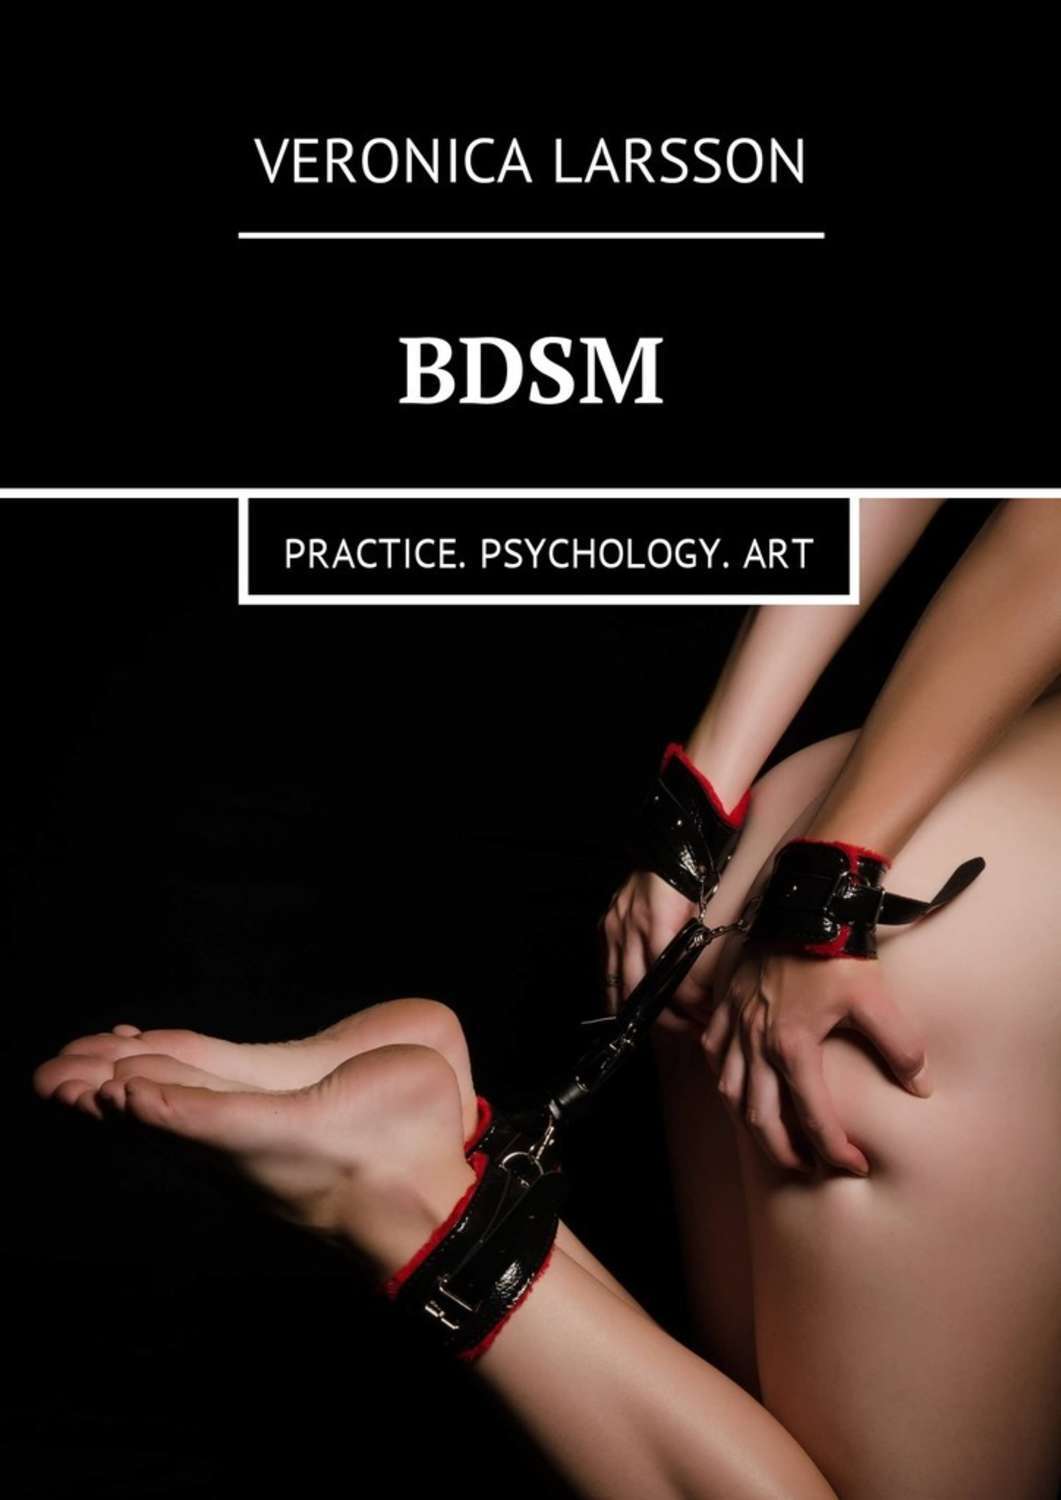 The psycology of bdsm book